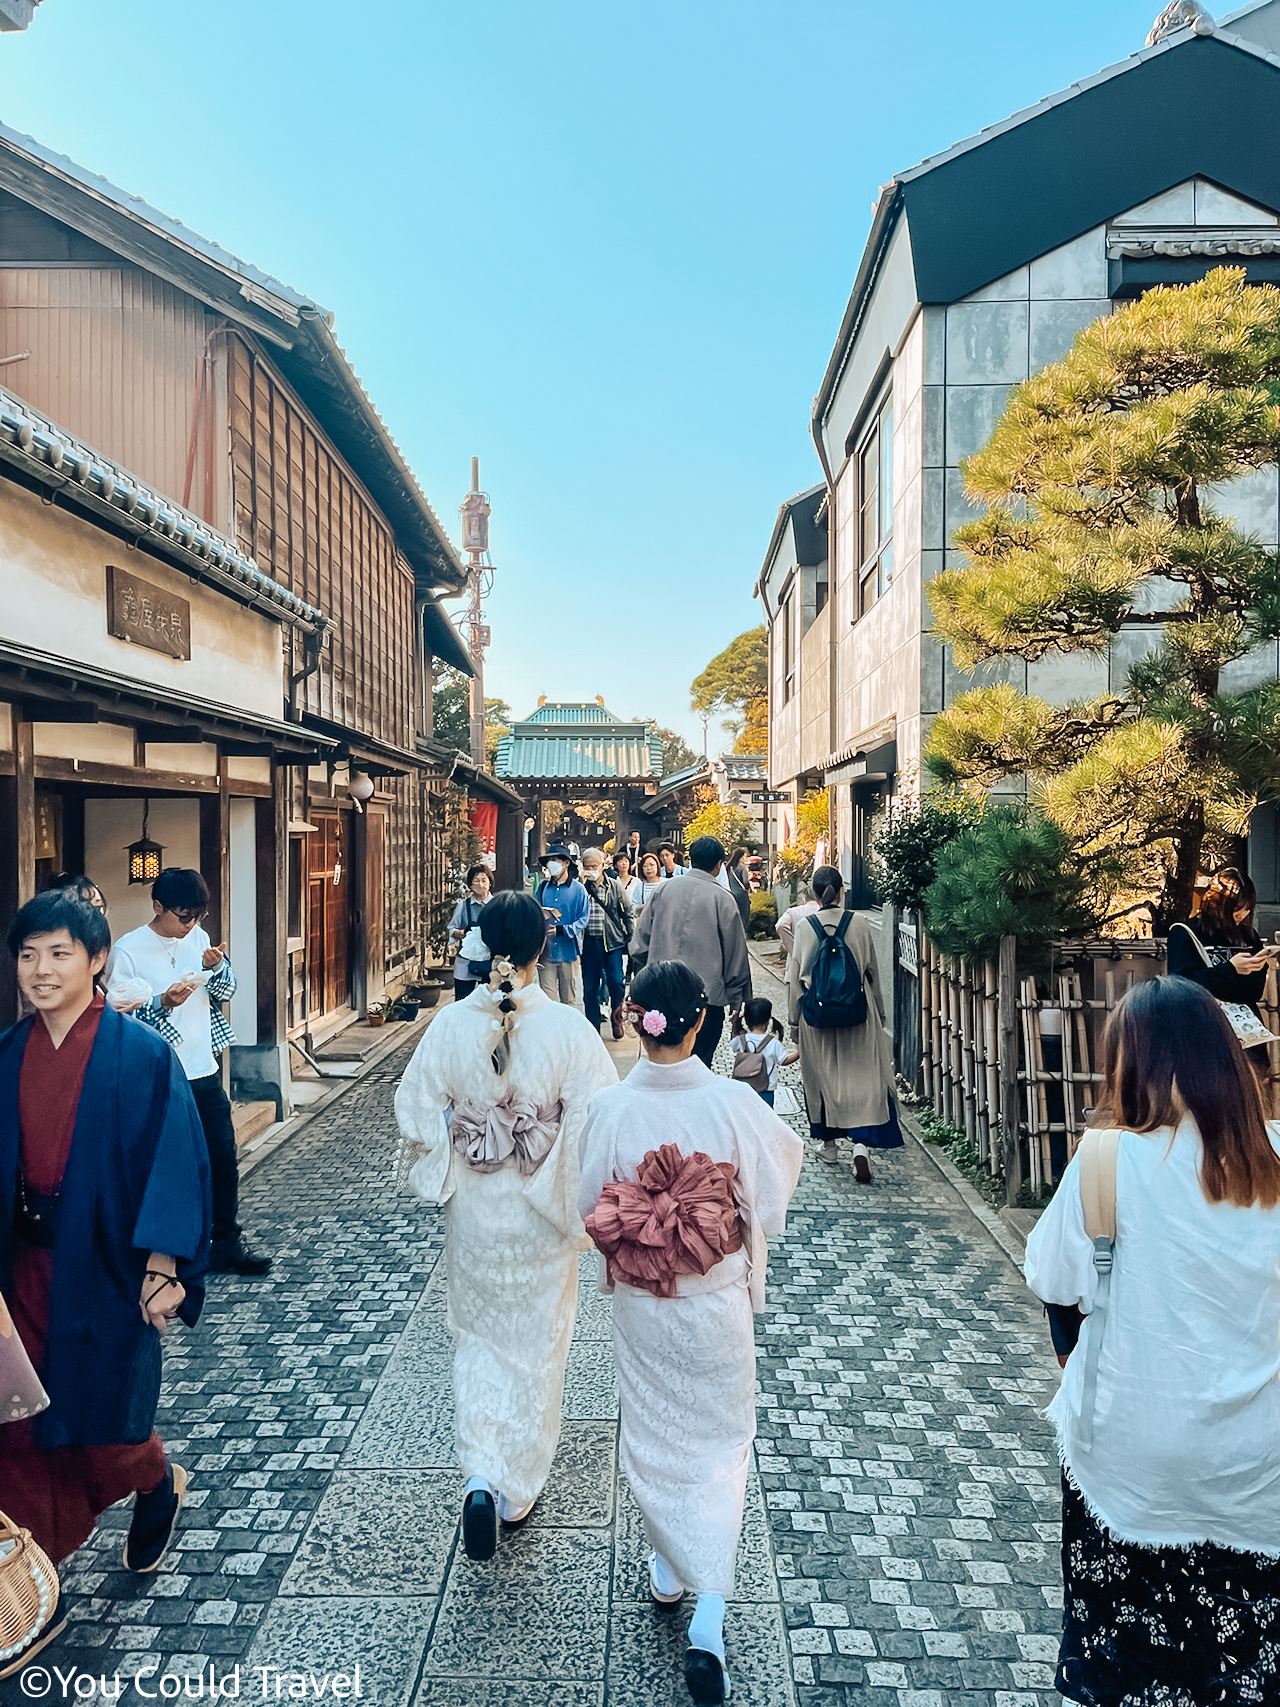 Locals dressed in Kimono in Kawagoe during culture day